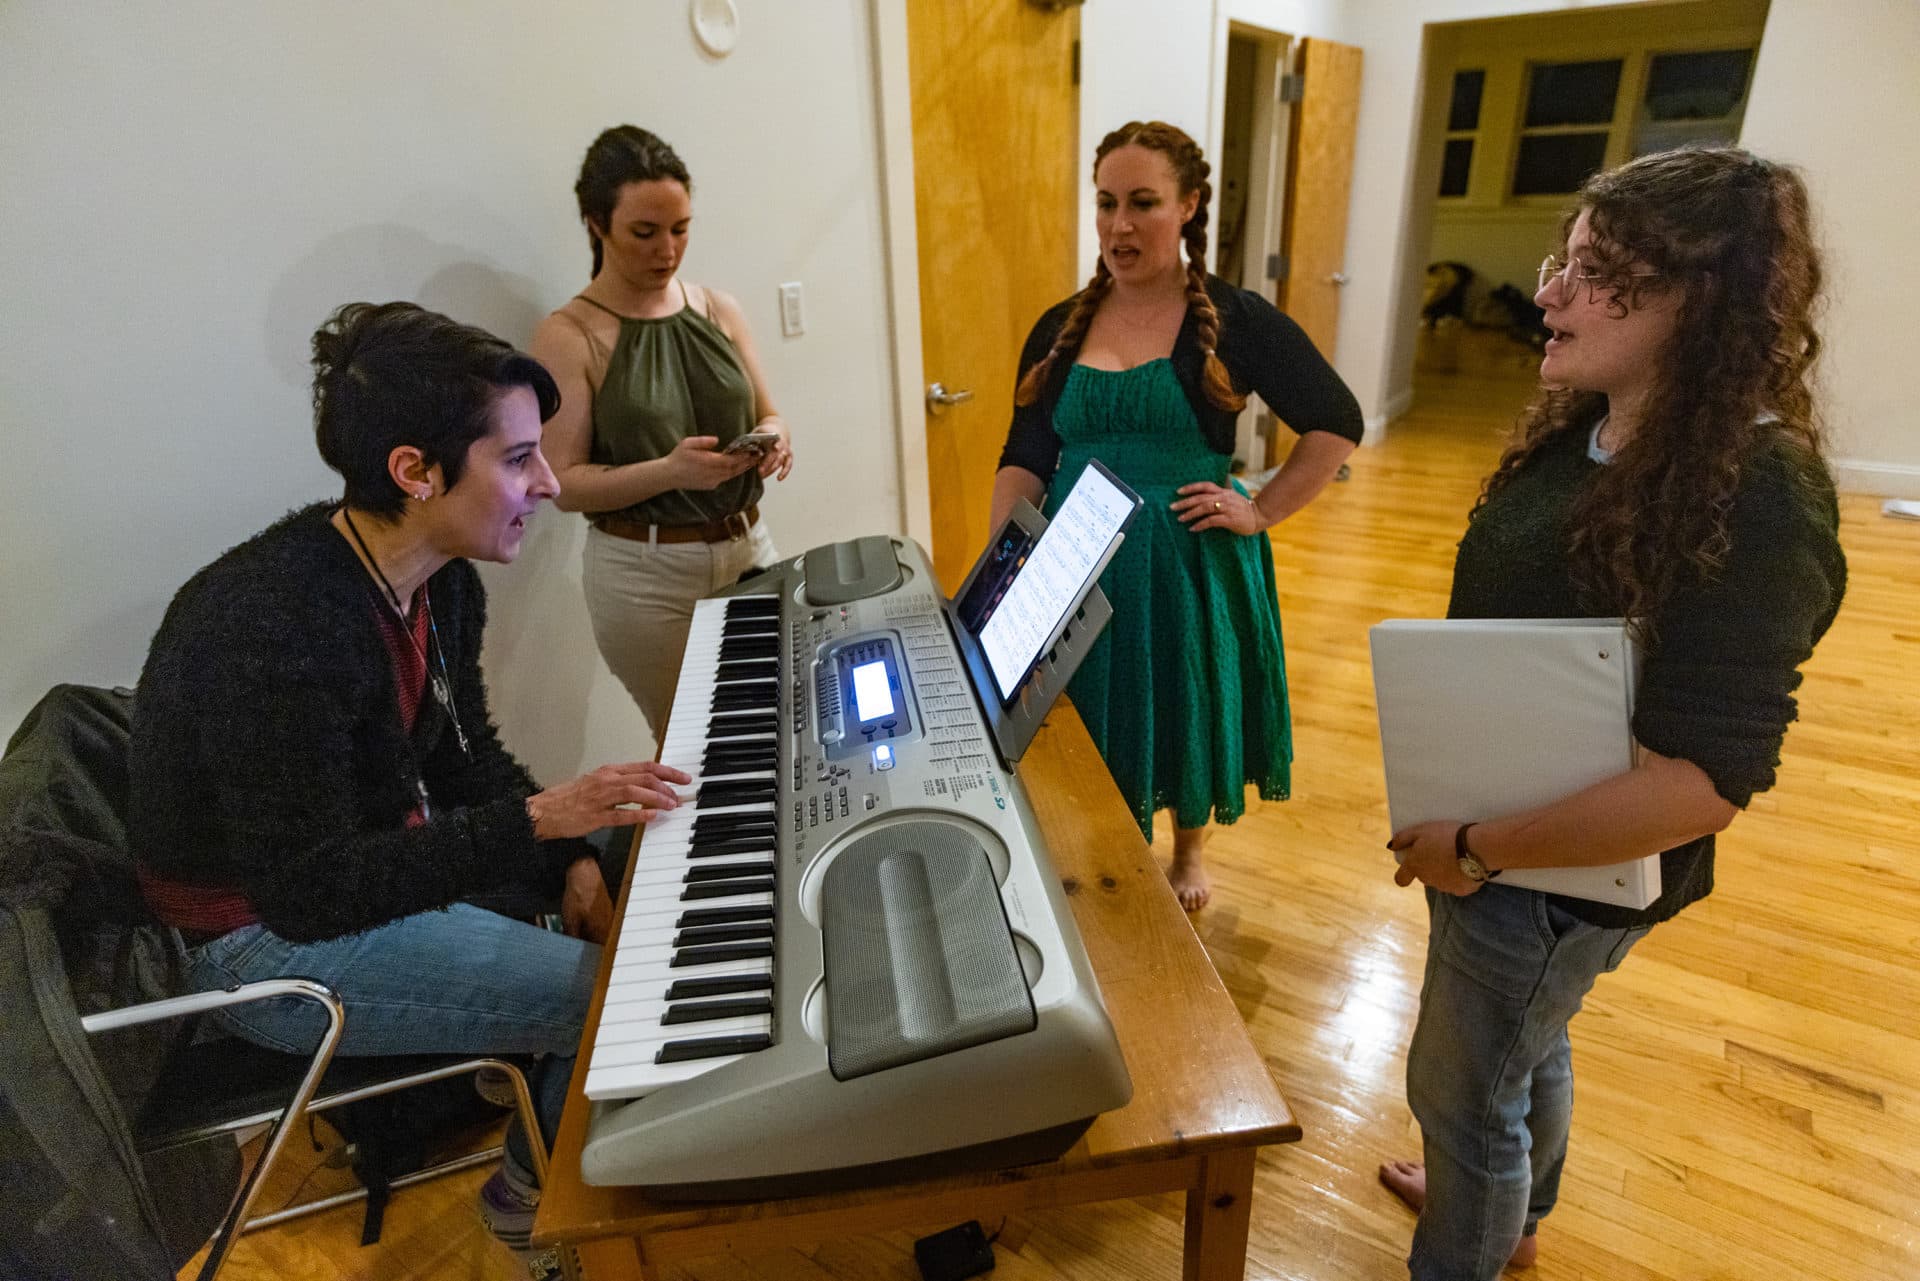 Composer Melissa Carubia directs the cast through one of the numbers in “T: An MBTA Musical” during a rehearsal at The Center for Arts at the Armory in Somerville. (Jesse Costa/WBUR)